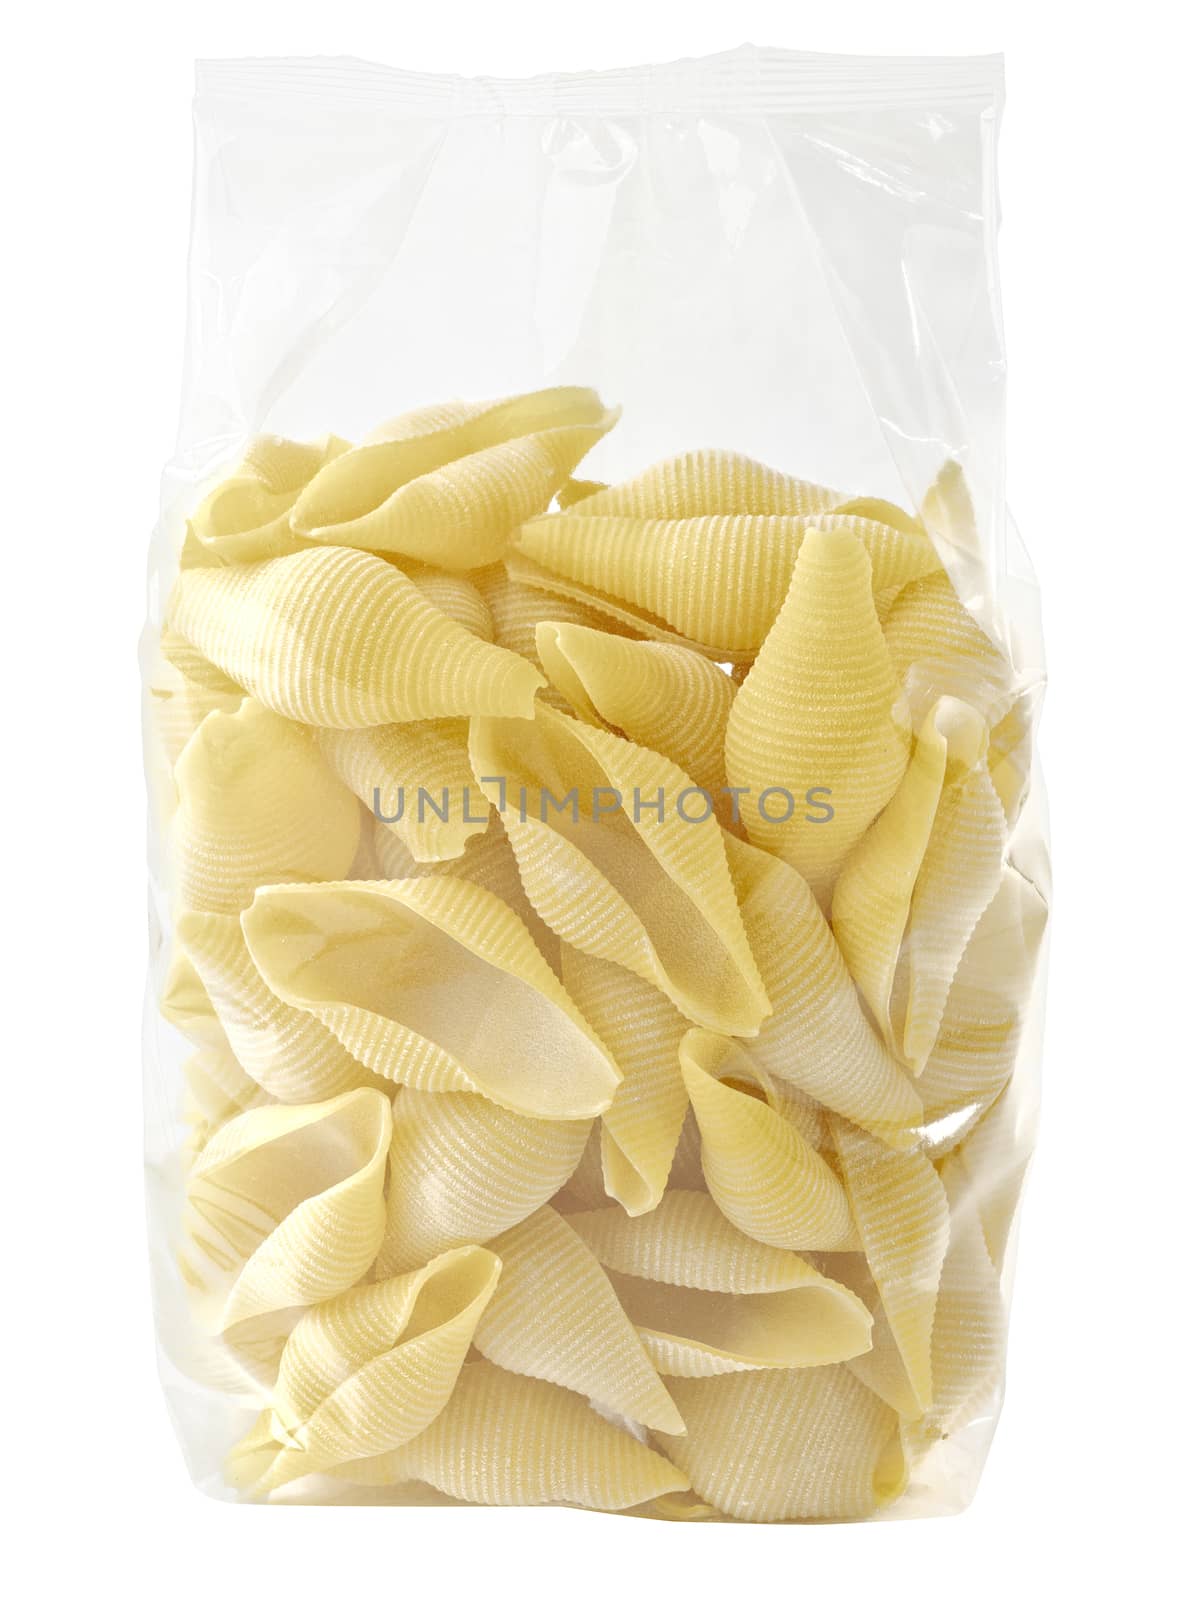 raw uncooked italian conchiglie jumbo shell pasta in plastic bag by zkruger